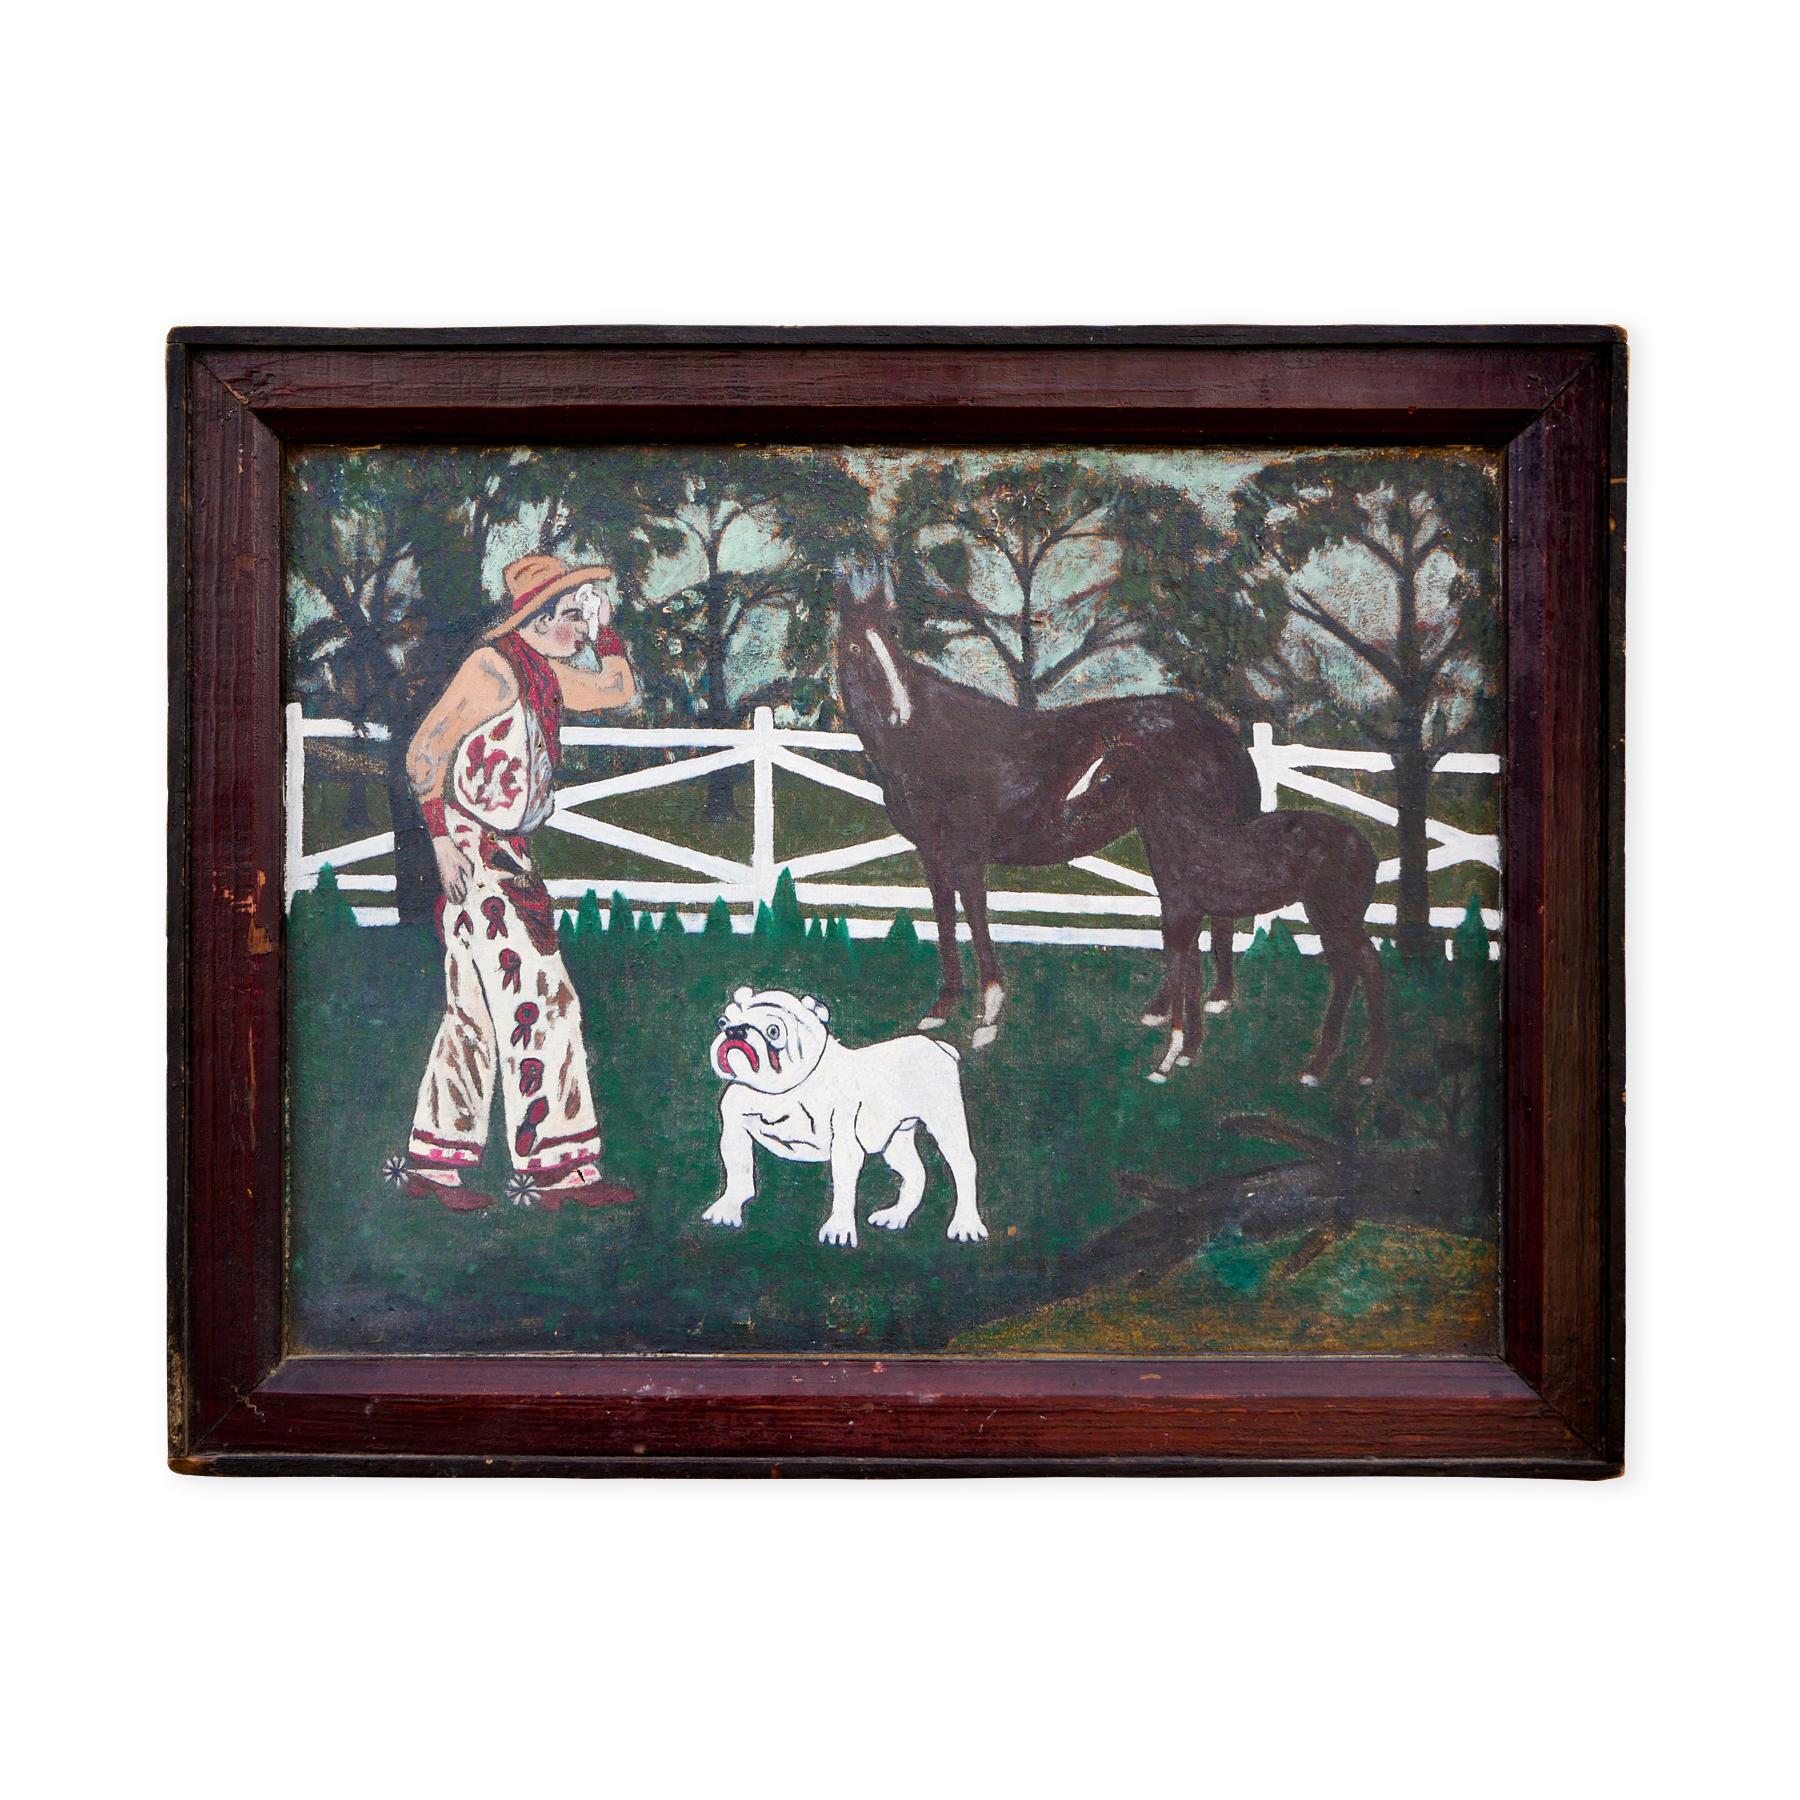 Abstract folk art painting of a western scene by an unknown artist. The work features a cowboy wearing spurs in a corral with a white bulldog and a pair of horse set against a grove of green trees. Currently hung in a brown wooden frame.

Dimensions